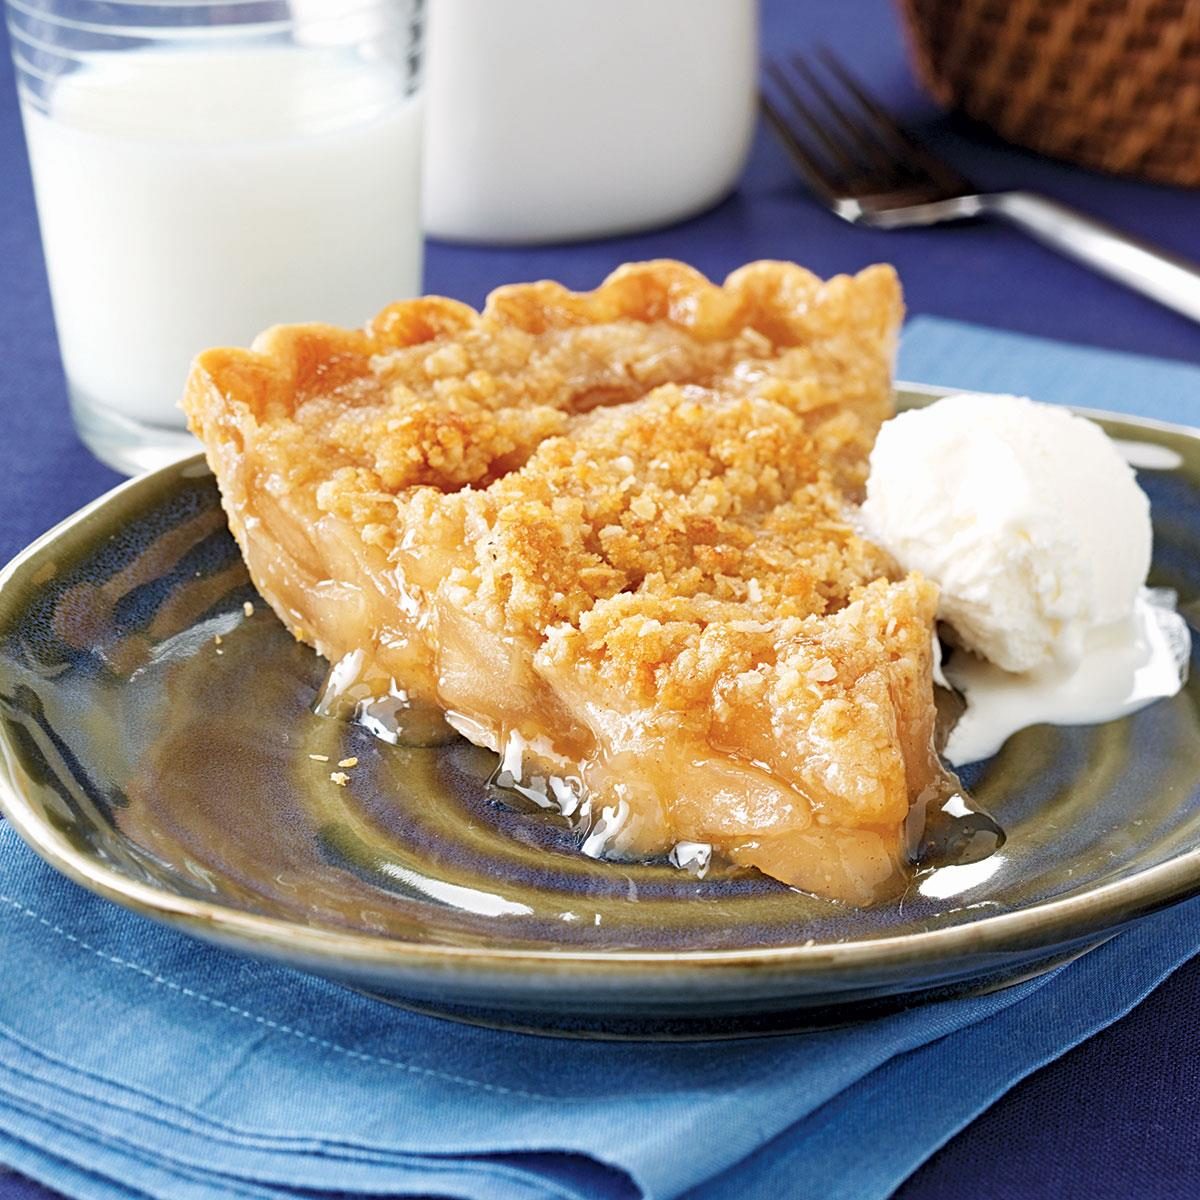 Apple Pie Recipe Nytimes - Find Vegetarian Recipes